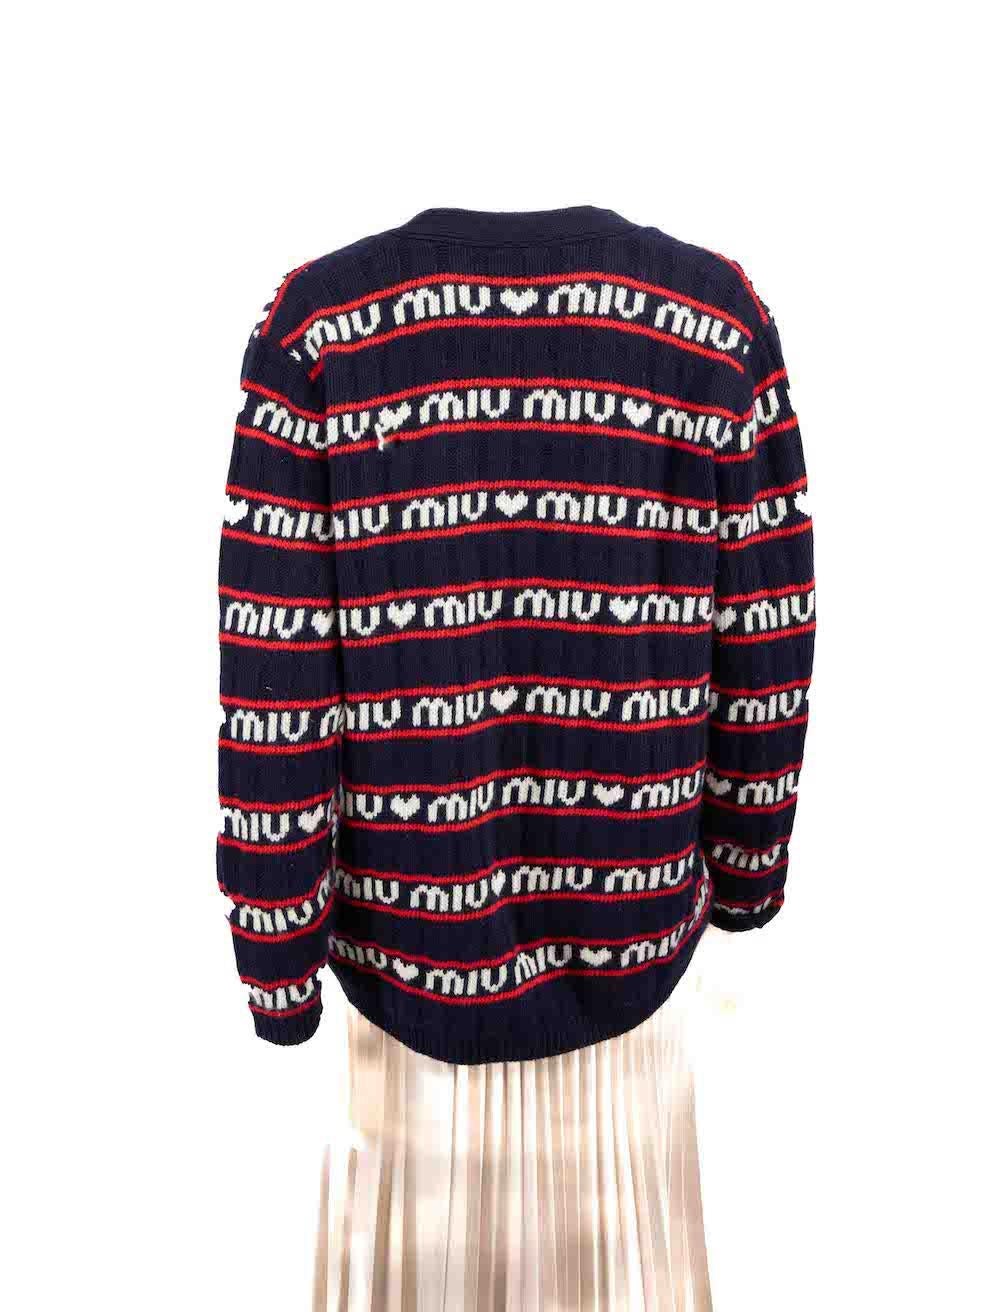 Miu Miu Logo-Intarsia Wool Knit Cardigan Size XS In Excellent Condition For Sale In London, GB